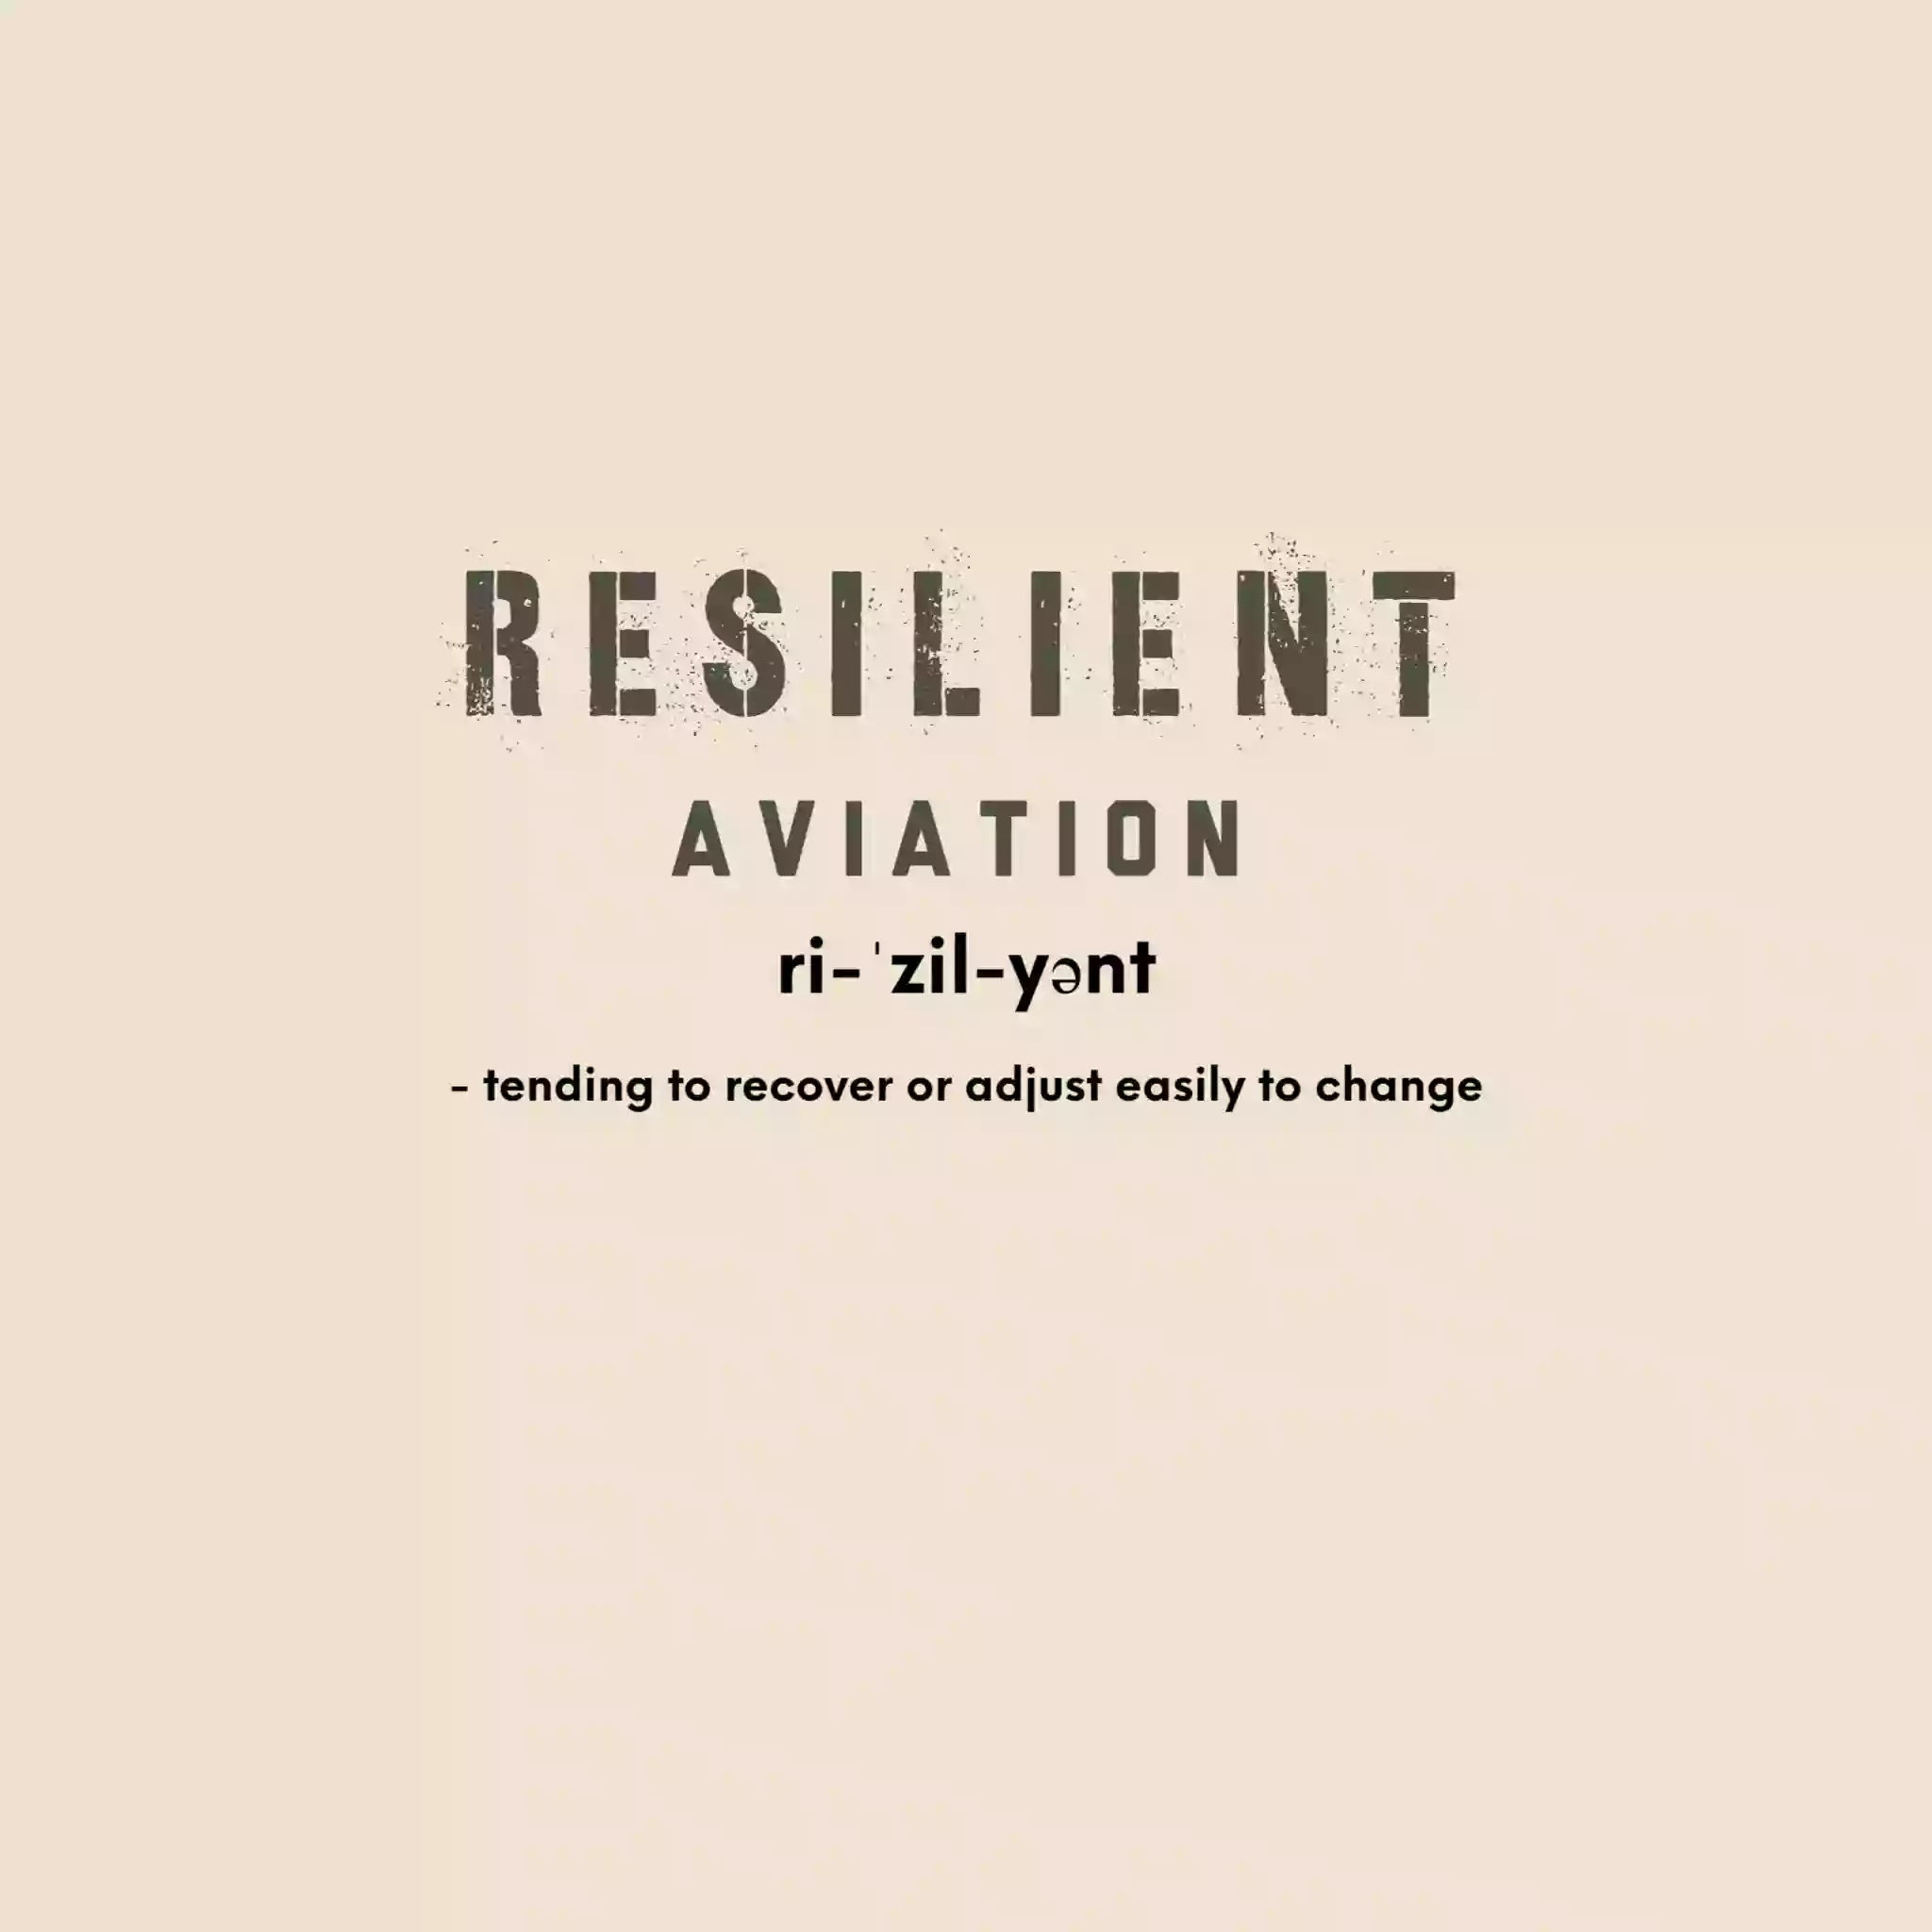 Resilient Aviation